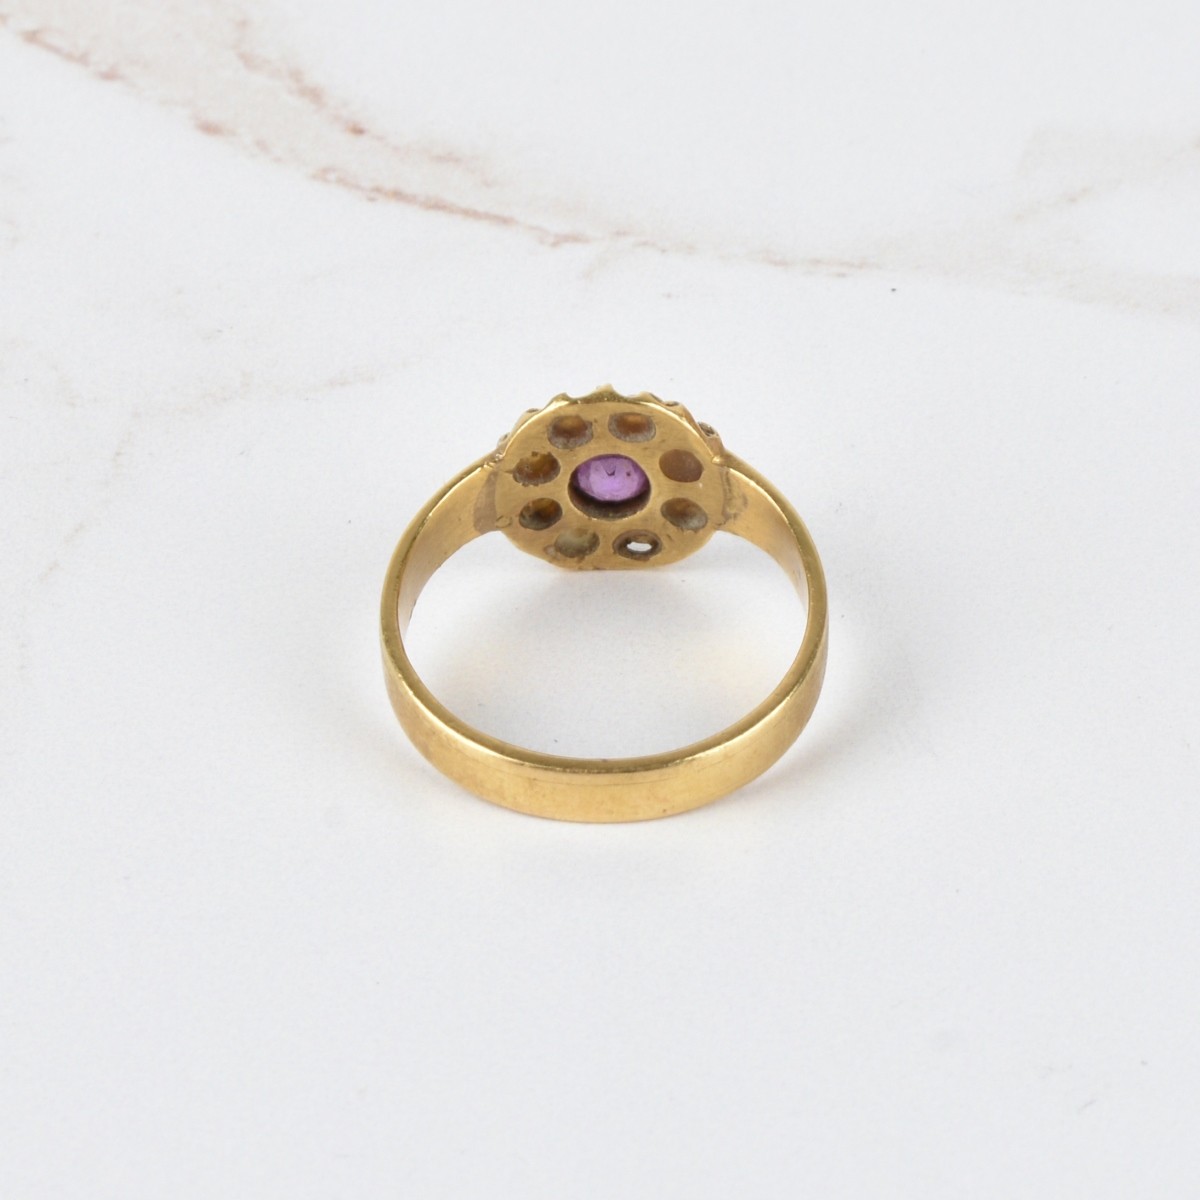 Burma Ruby, Pearl and 10K Ring